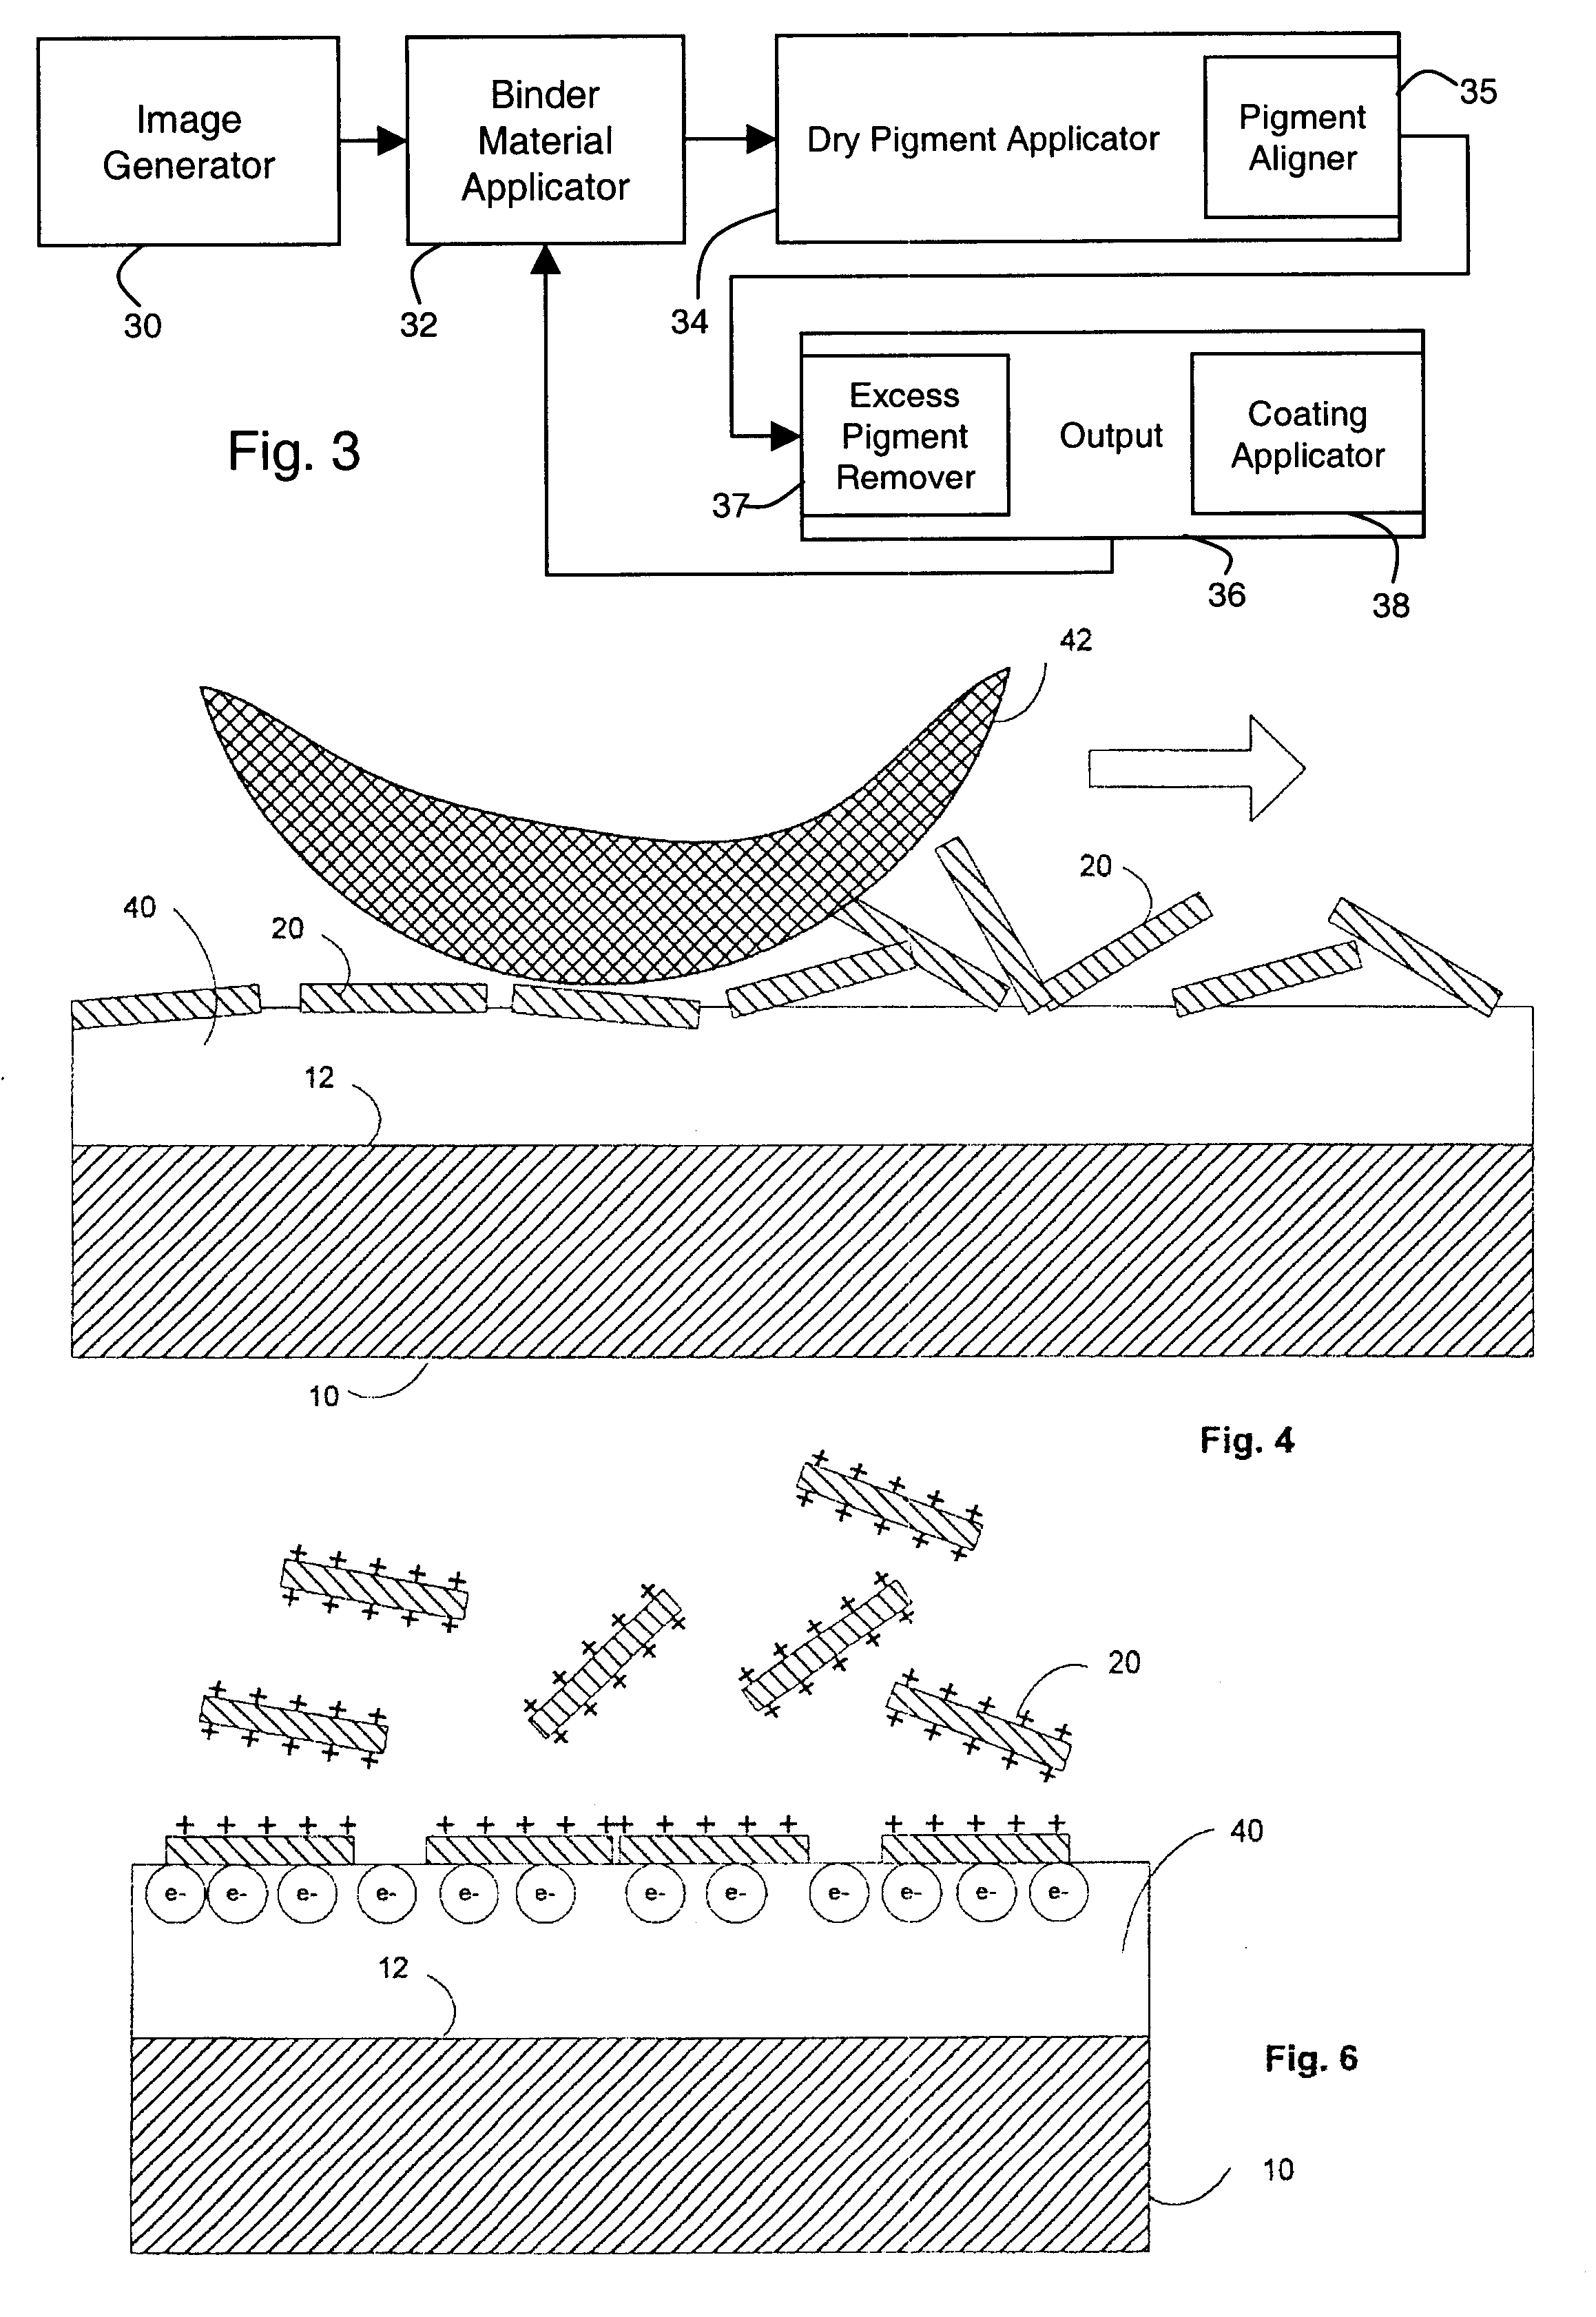 Apparatus for producing multi-color images on substrates using dry multi-colored cholesteric liquid crystal (CLC) pigment materials